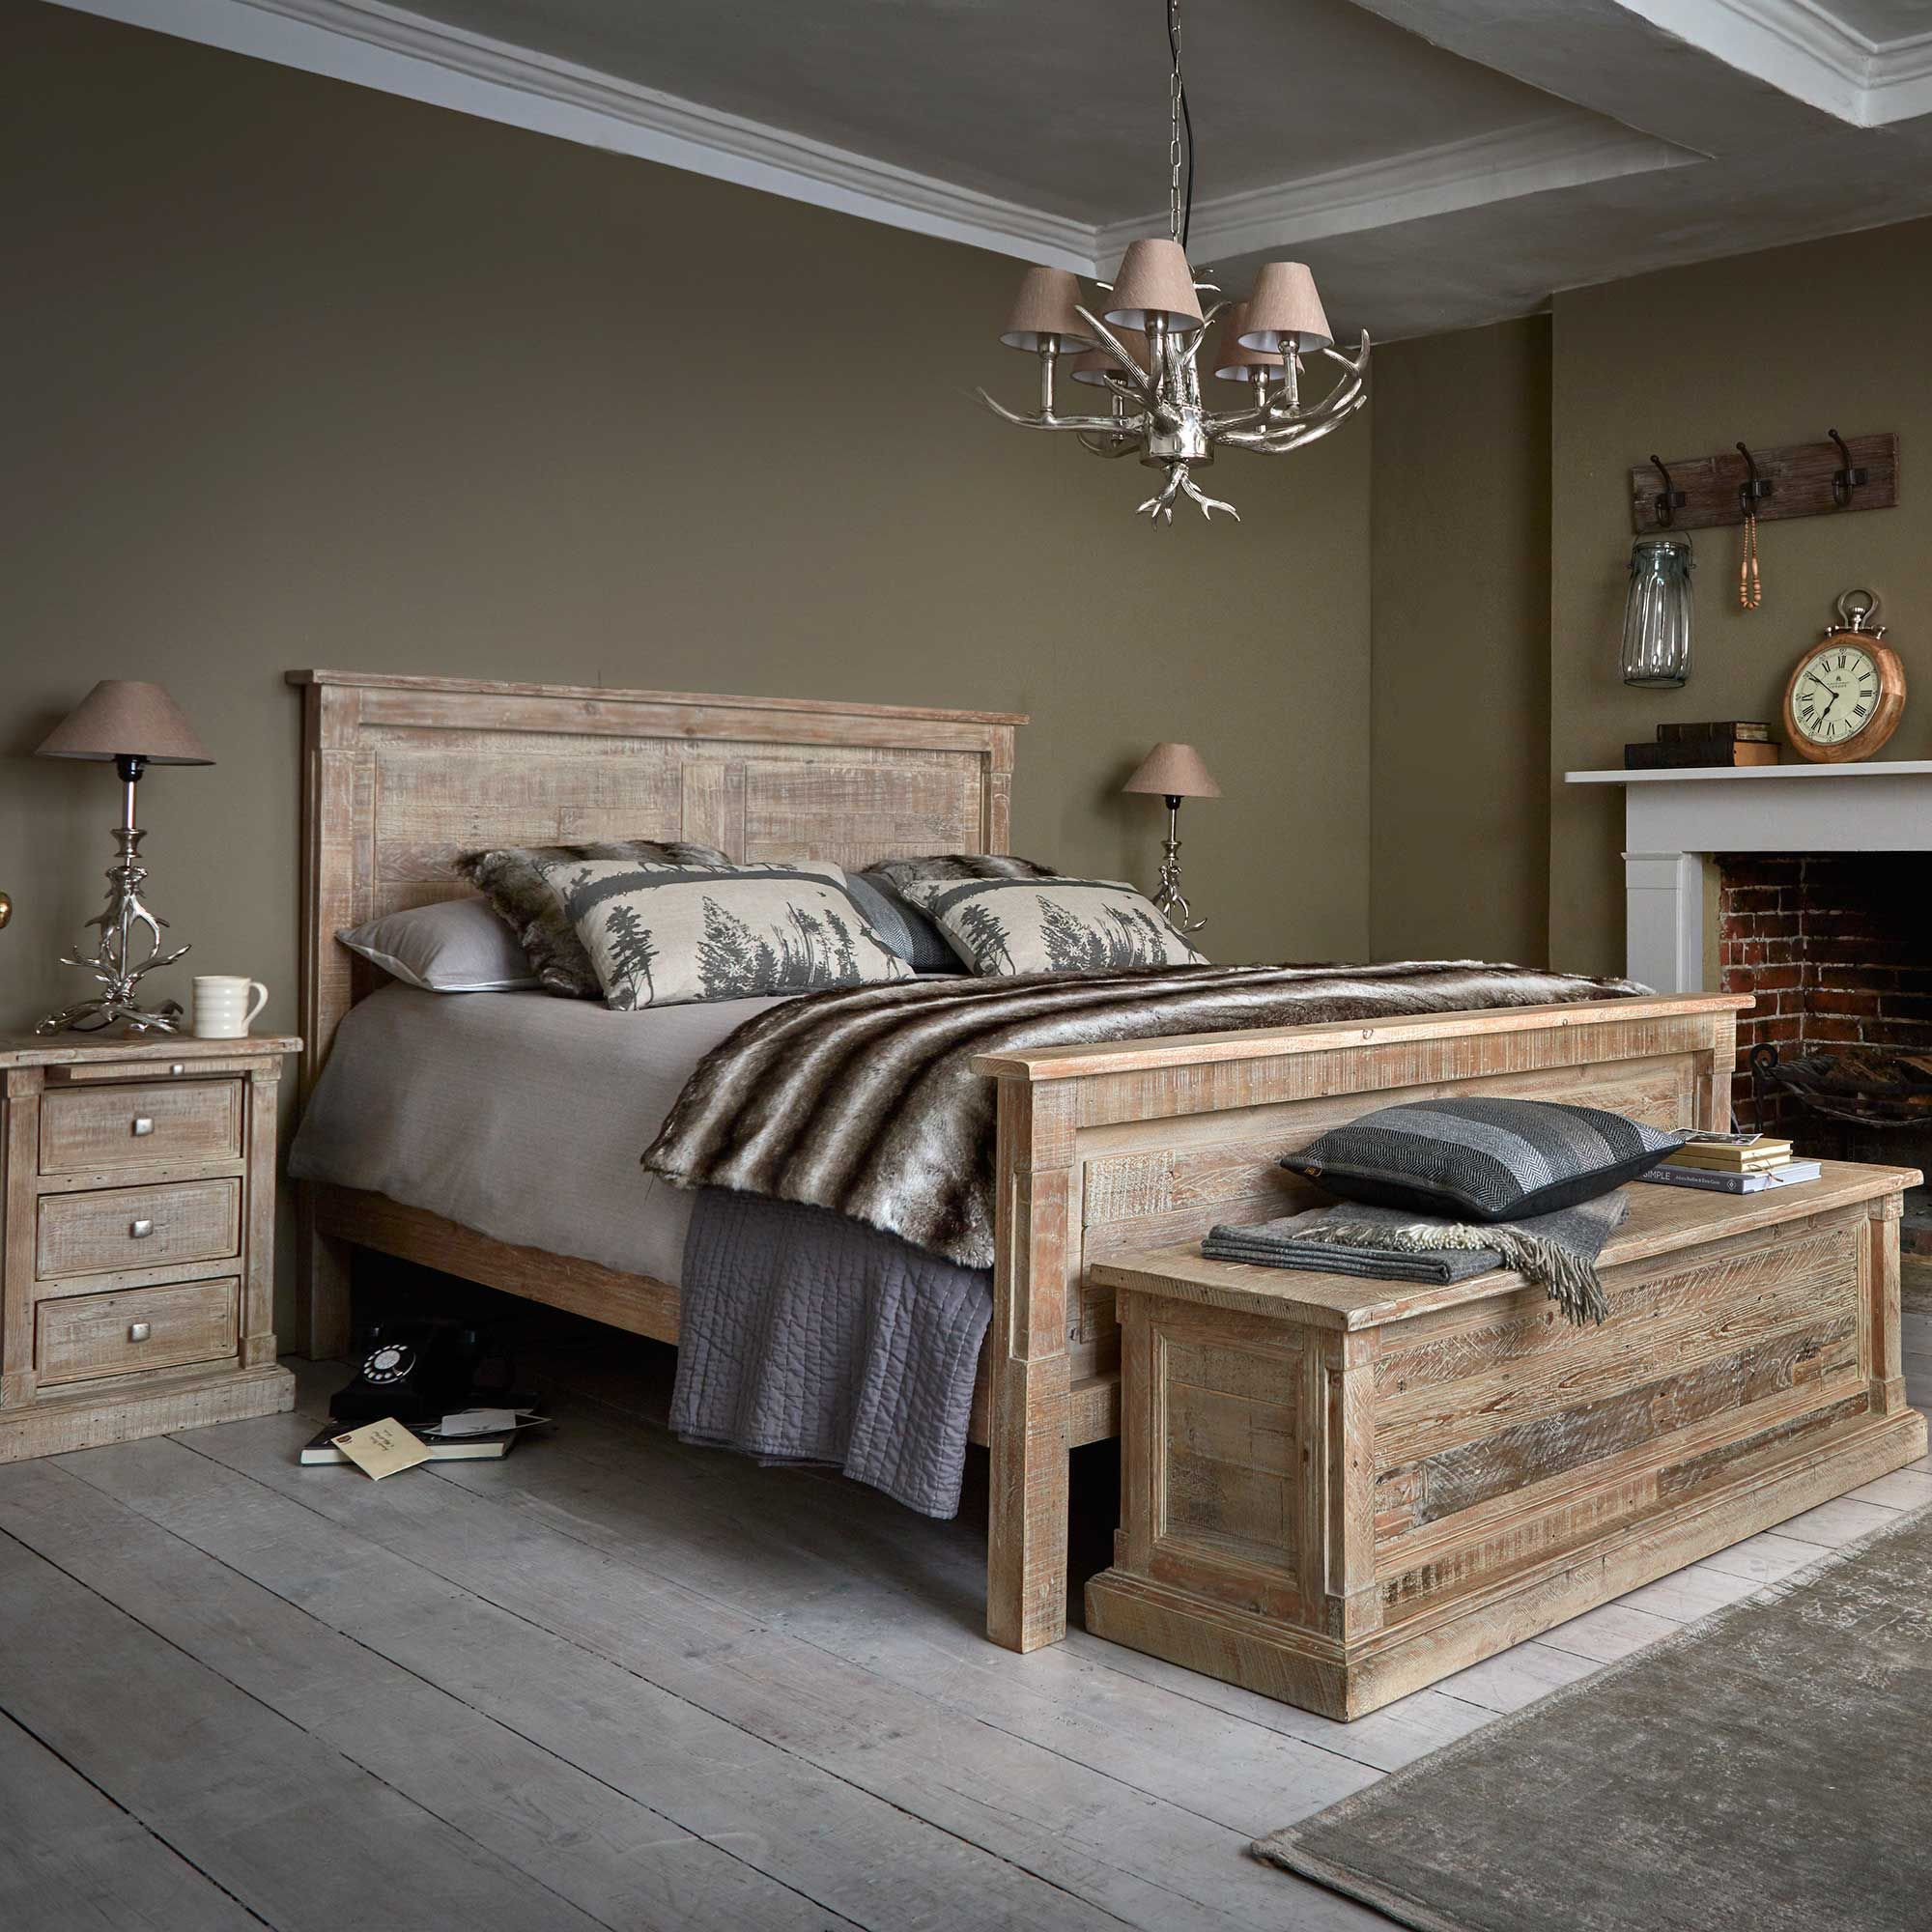 Rustic Wood Bedroom Set
 The Austen Bed Frame is made from reclaimed wood with a